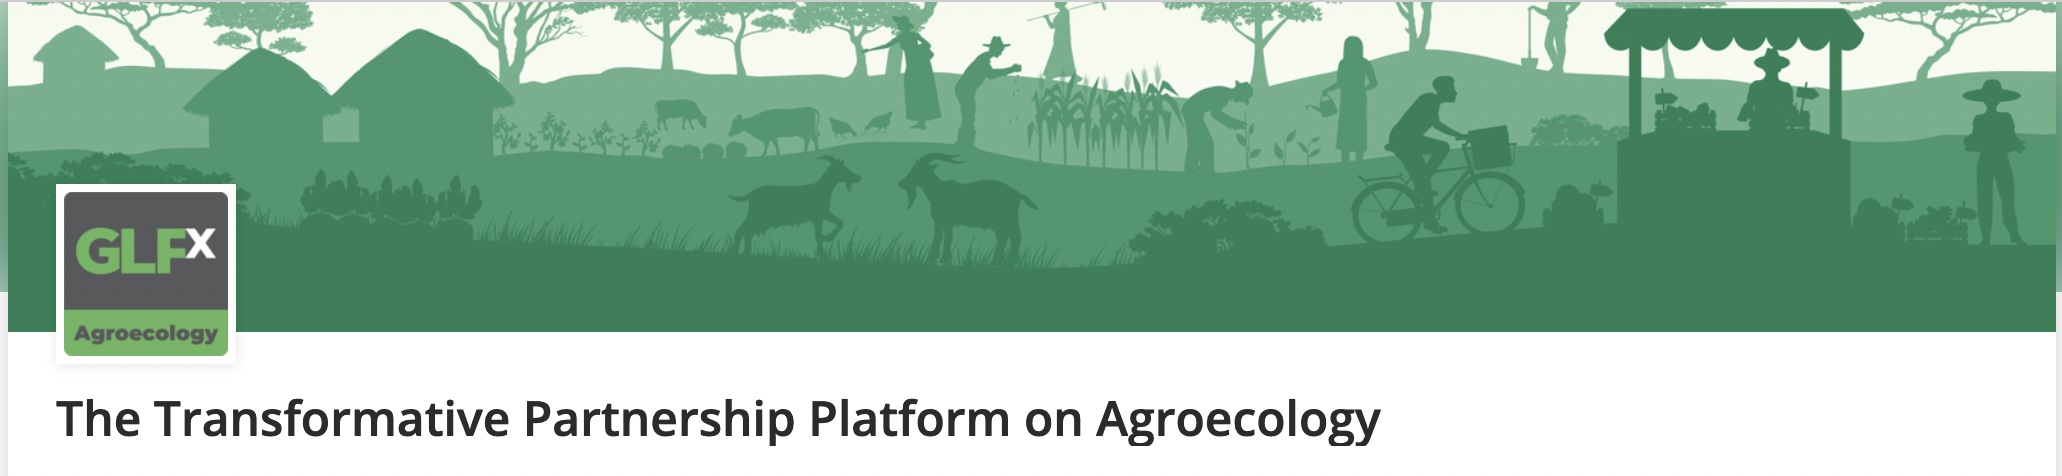 Invitation to review "Policies for Agroecology" report